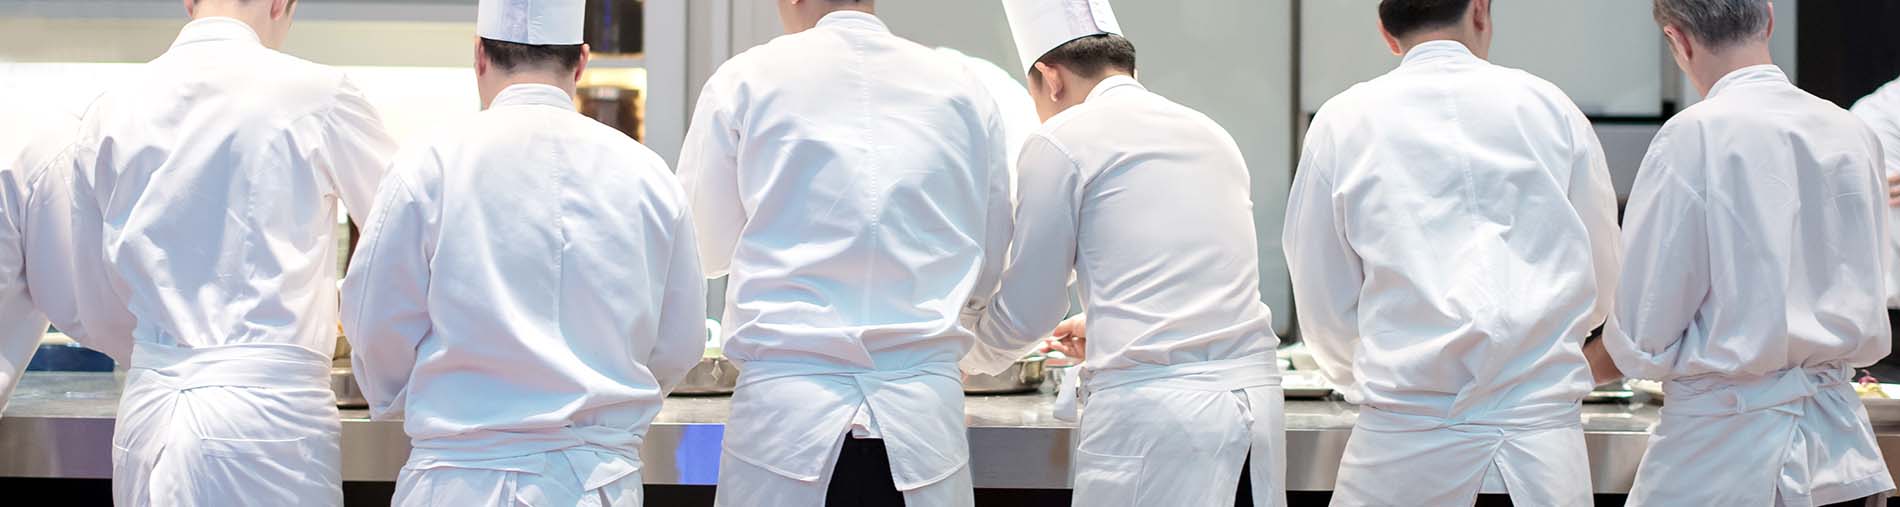 The Chef Jacket for the Job - Chef Works